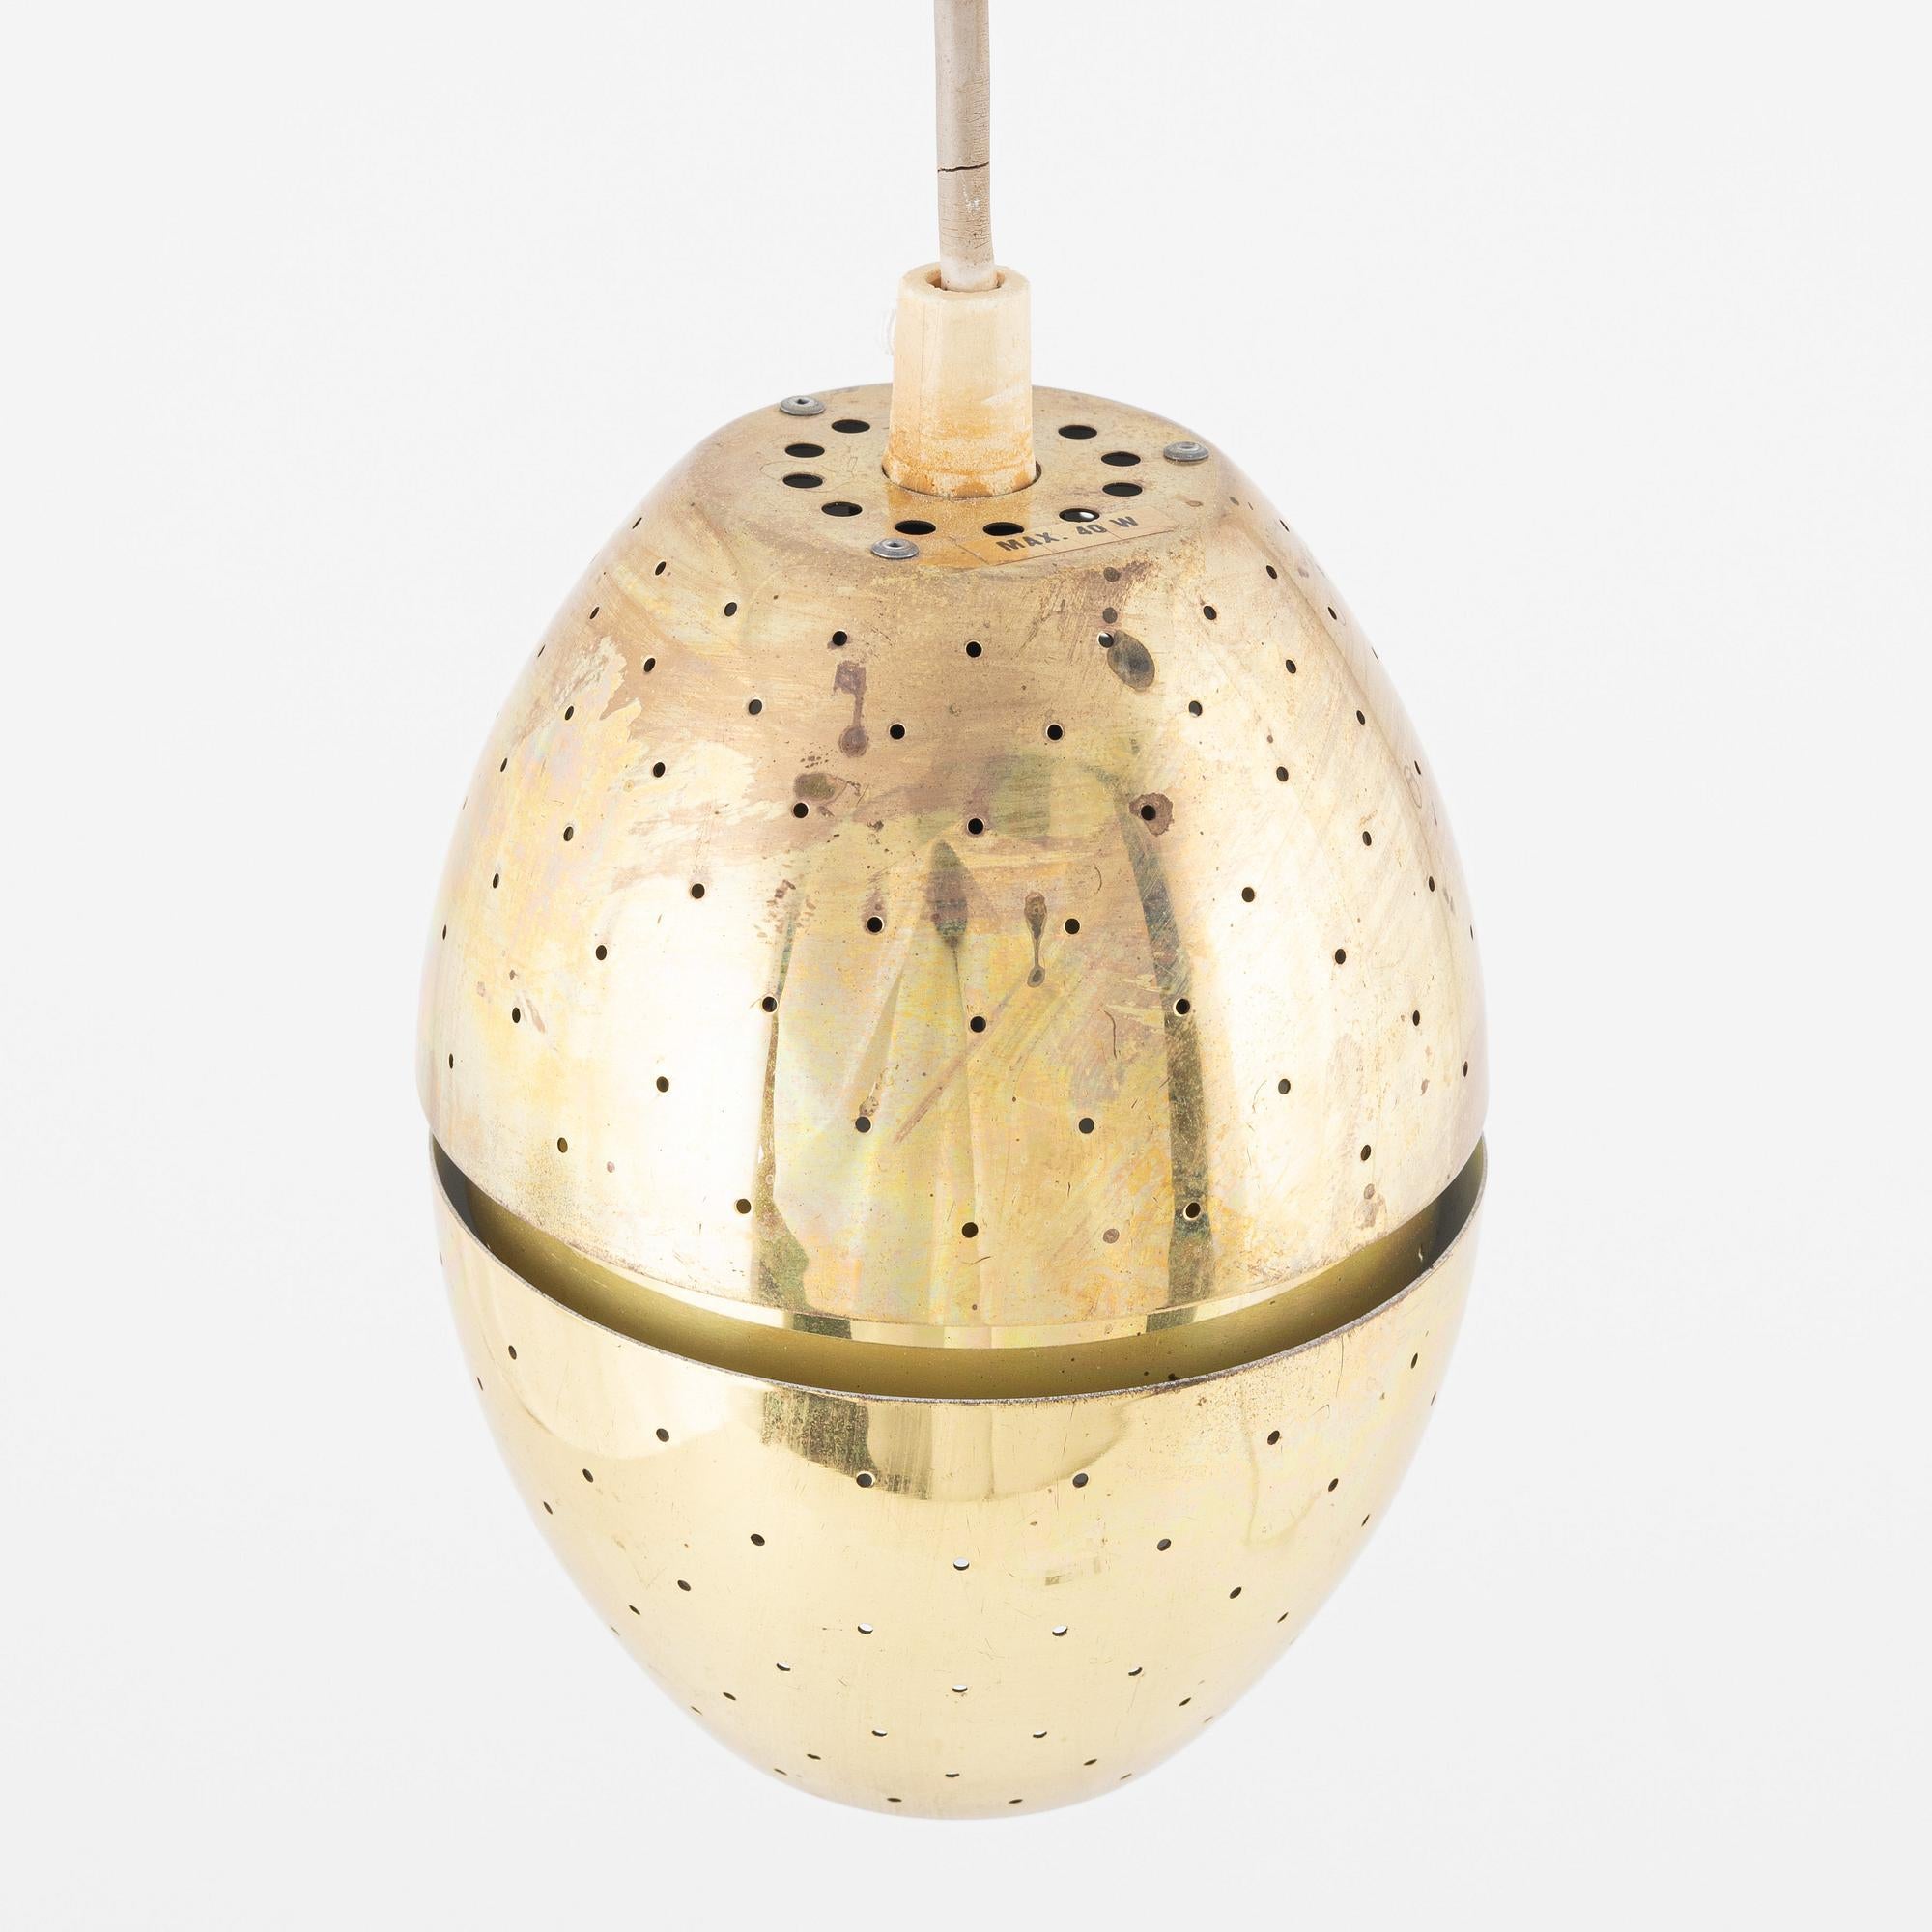 Hans-Agne Jakobsson, a 'Florina T790' pendant lamp, Markaryd.

Perforated brass. Height 16 cm diameter 10 CM

Good condition,no bump,  oxidation can be cleaned .
4 lights available , price for 1 light.
Provenance
Anders Pehrson (1912-1982). He was